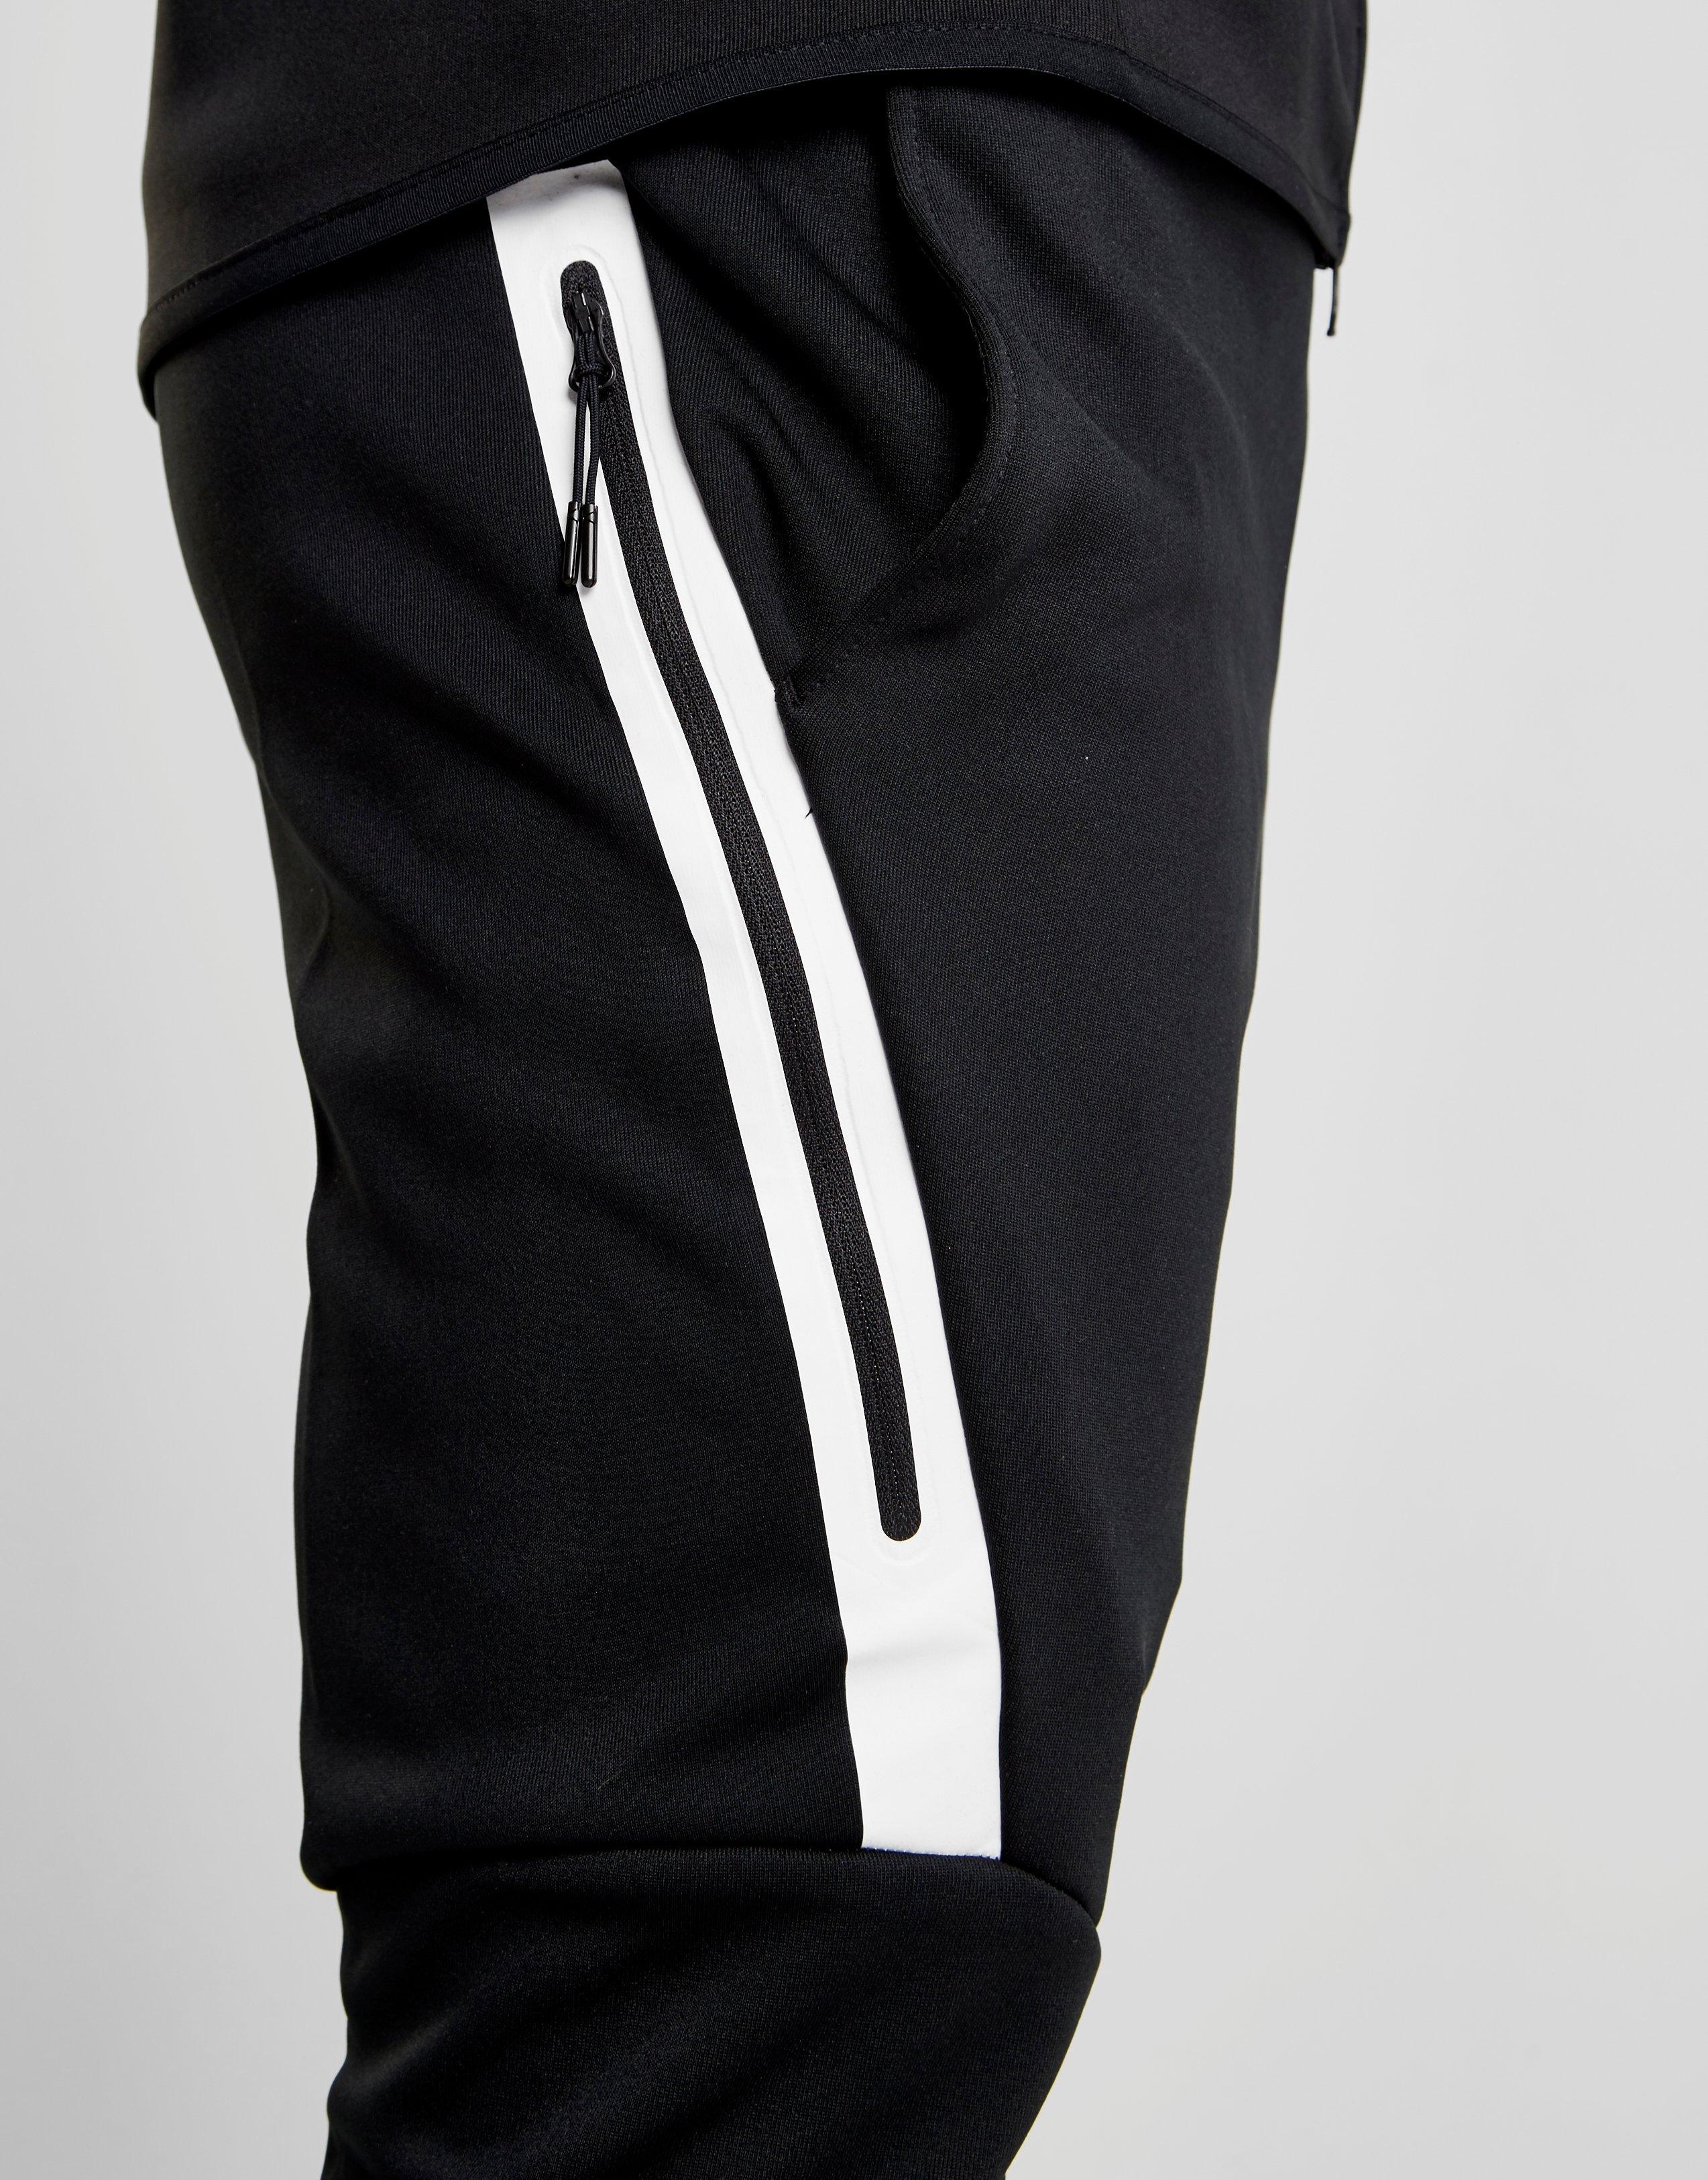 Nike Synthetic Tech Poly Track Pants in Black for Men - Lyst